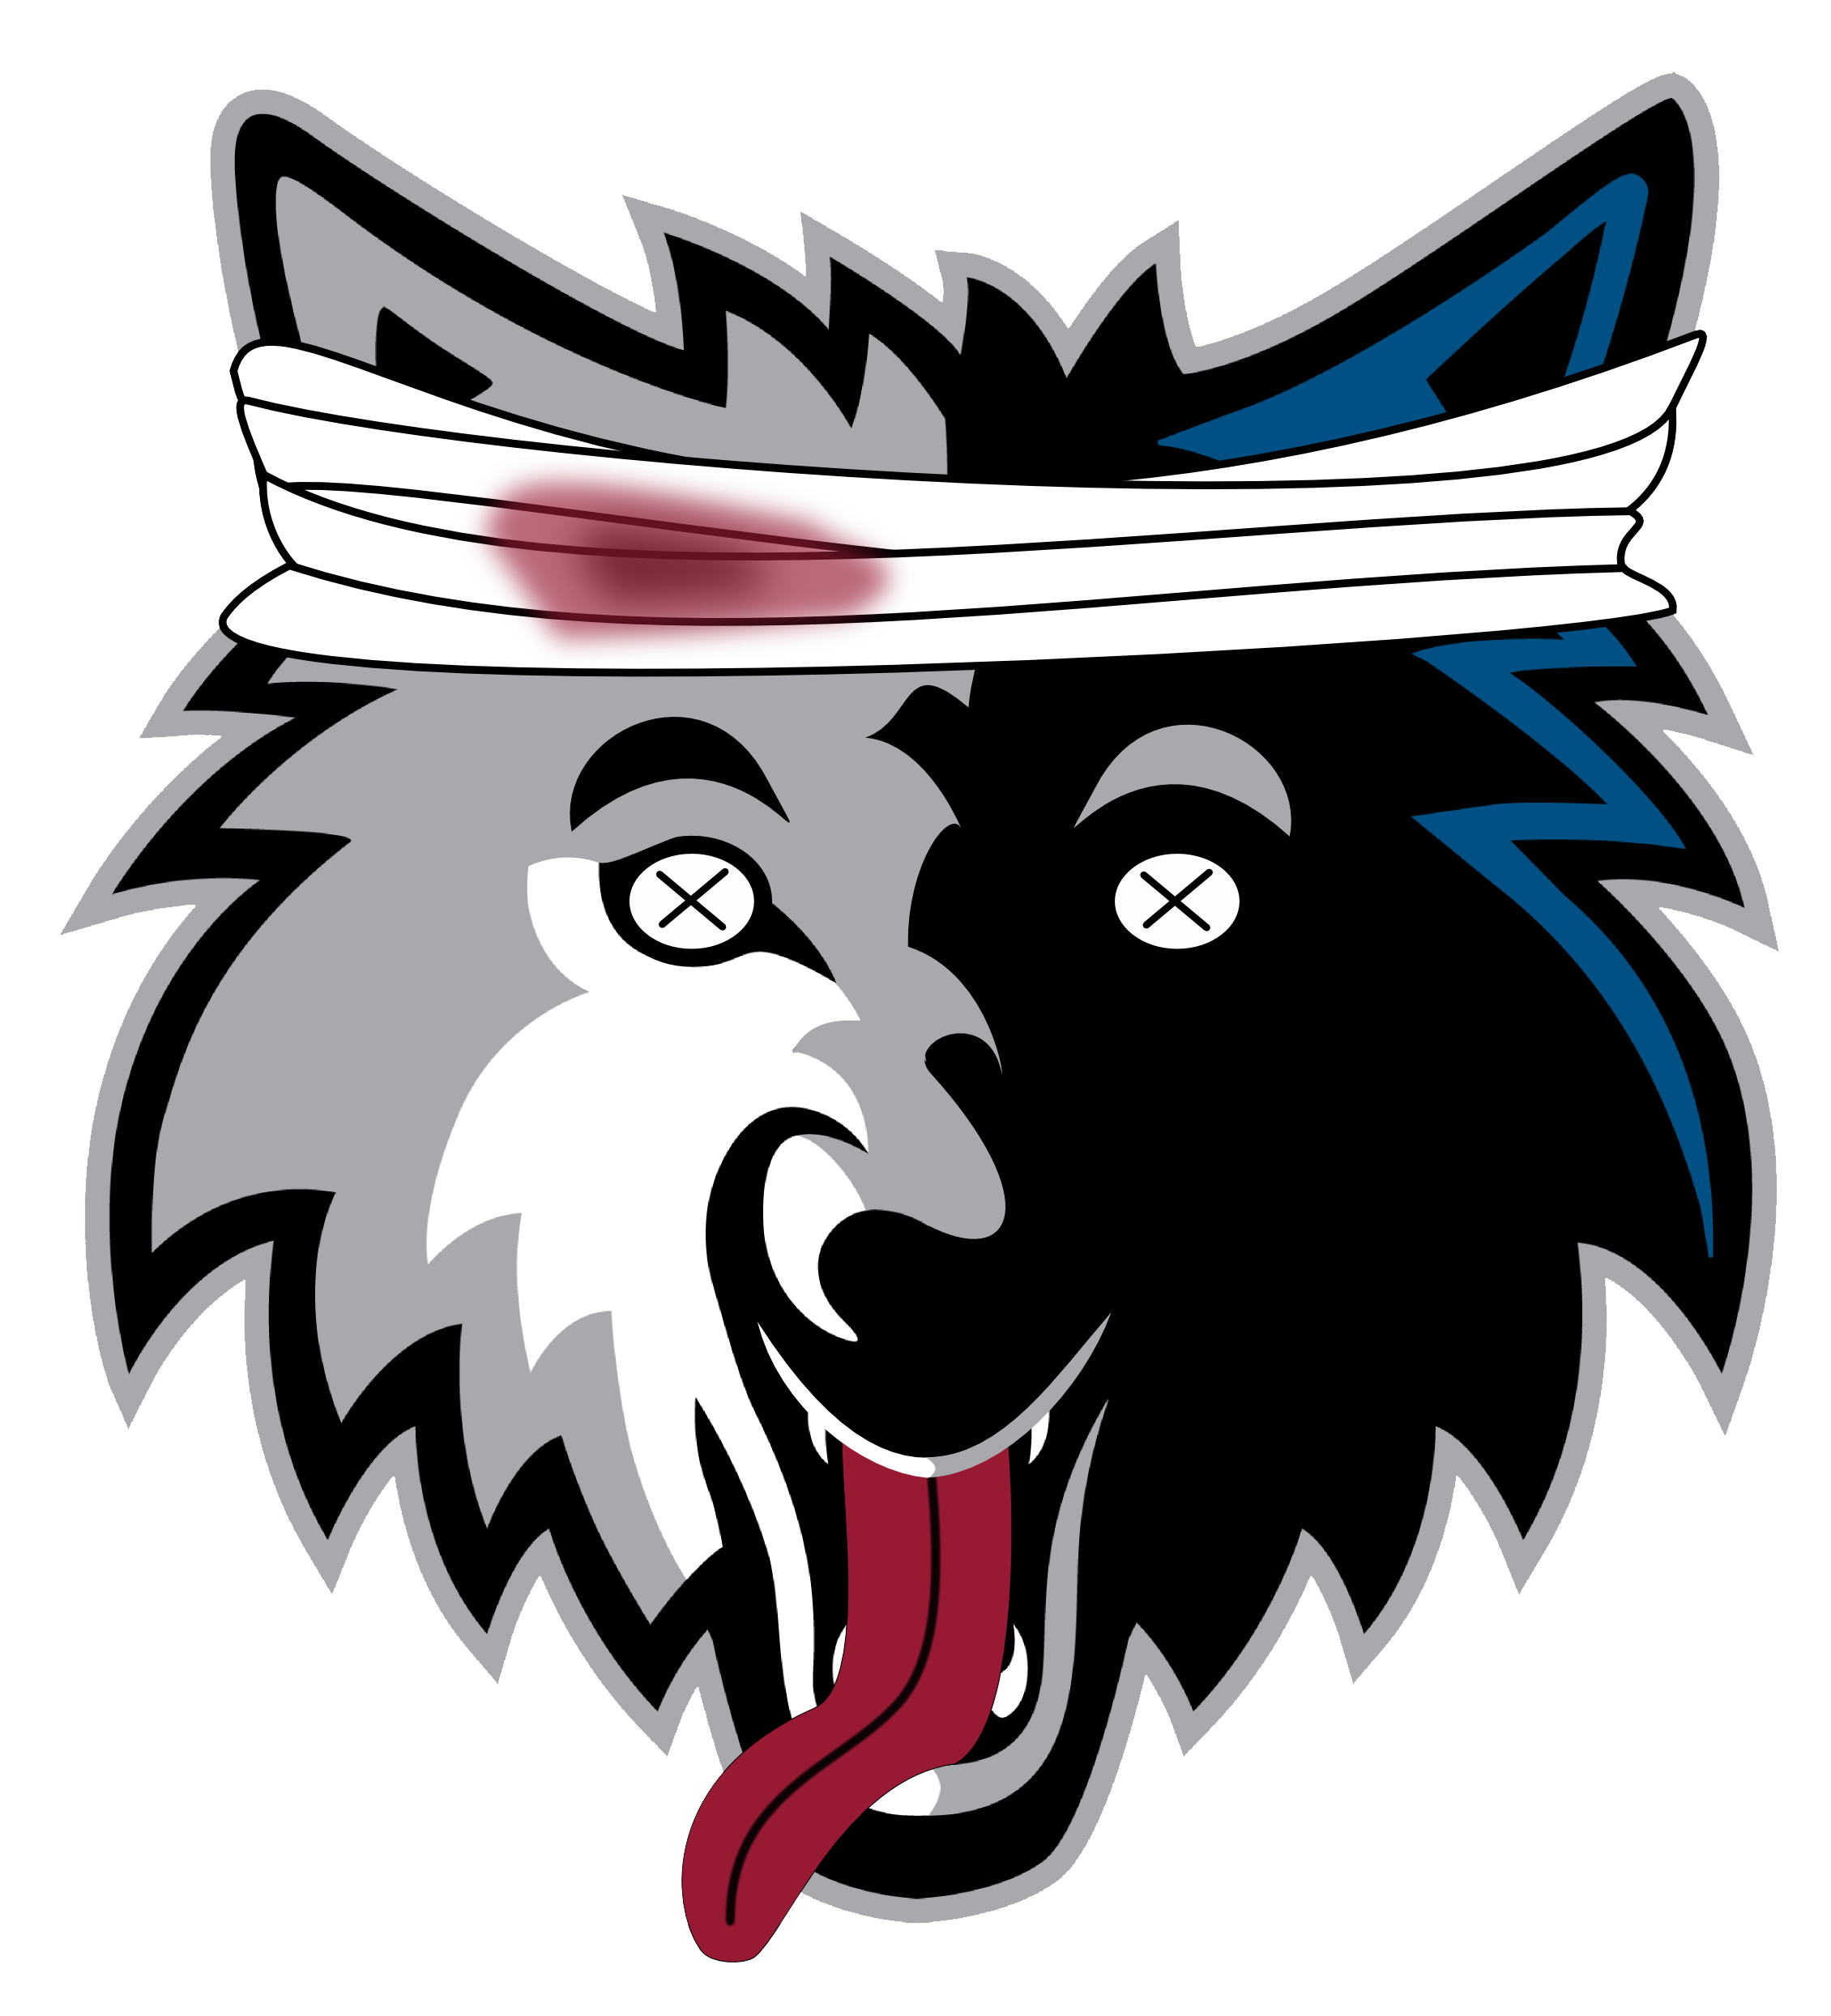 Download PNG image - Timberwolves Logo Png Clipart 470